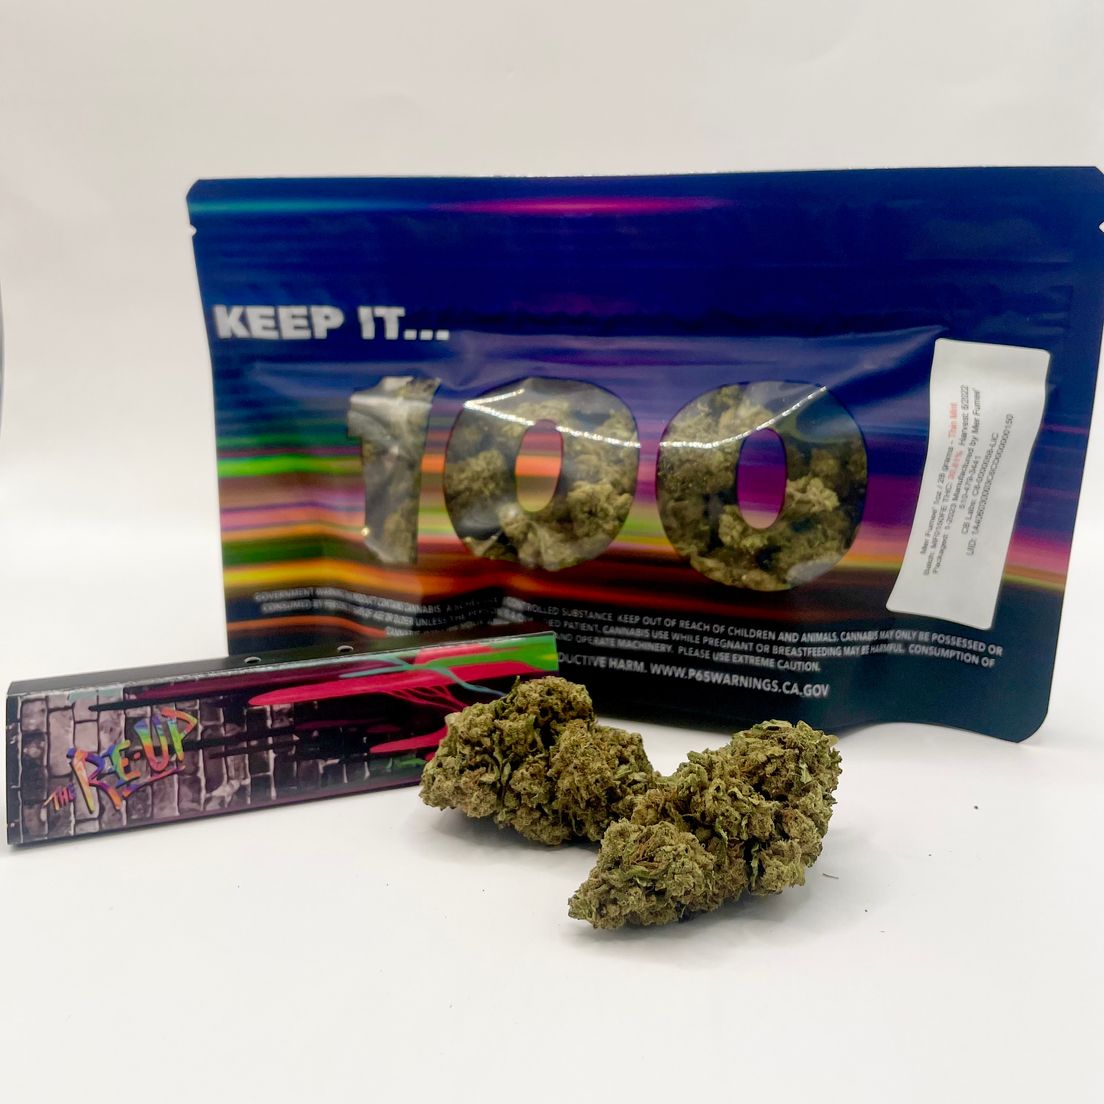 *Deal! $79 1 oz. Thin Mint (30.81%/Hybrid) - Keep It 100 + Rolling Papers